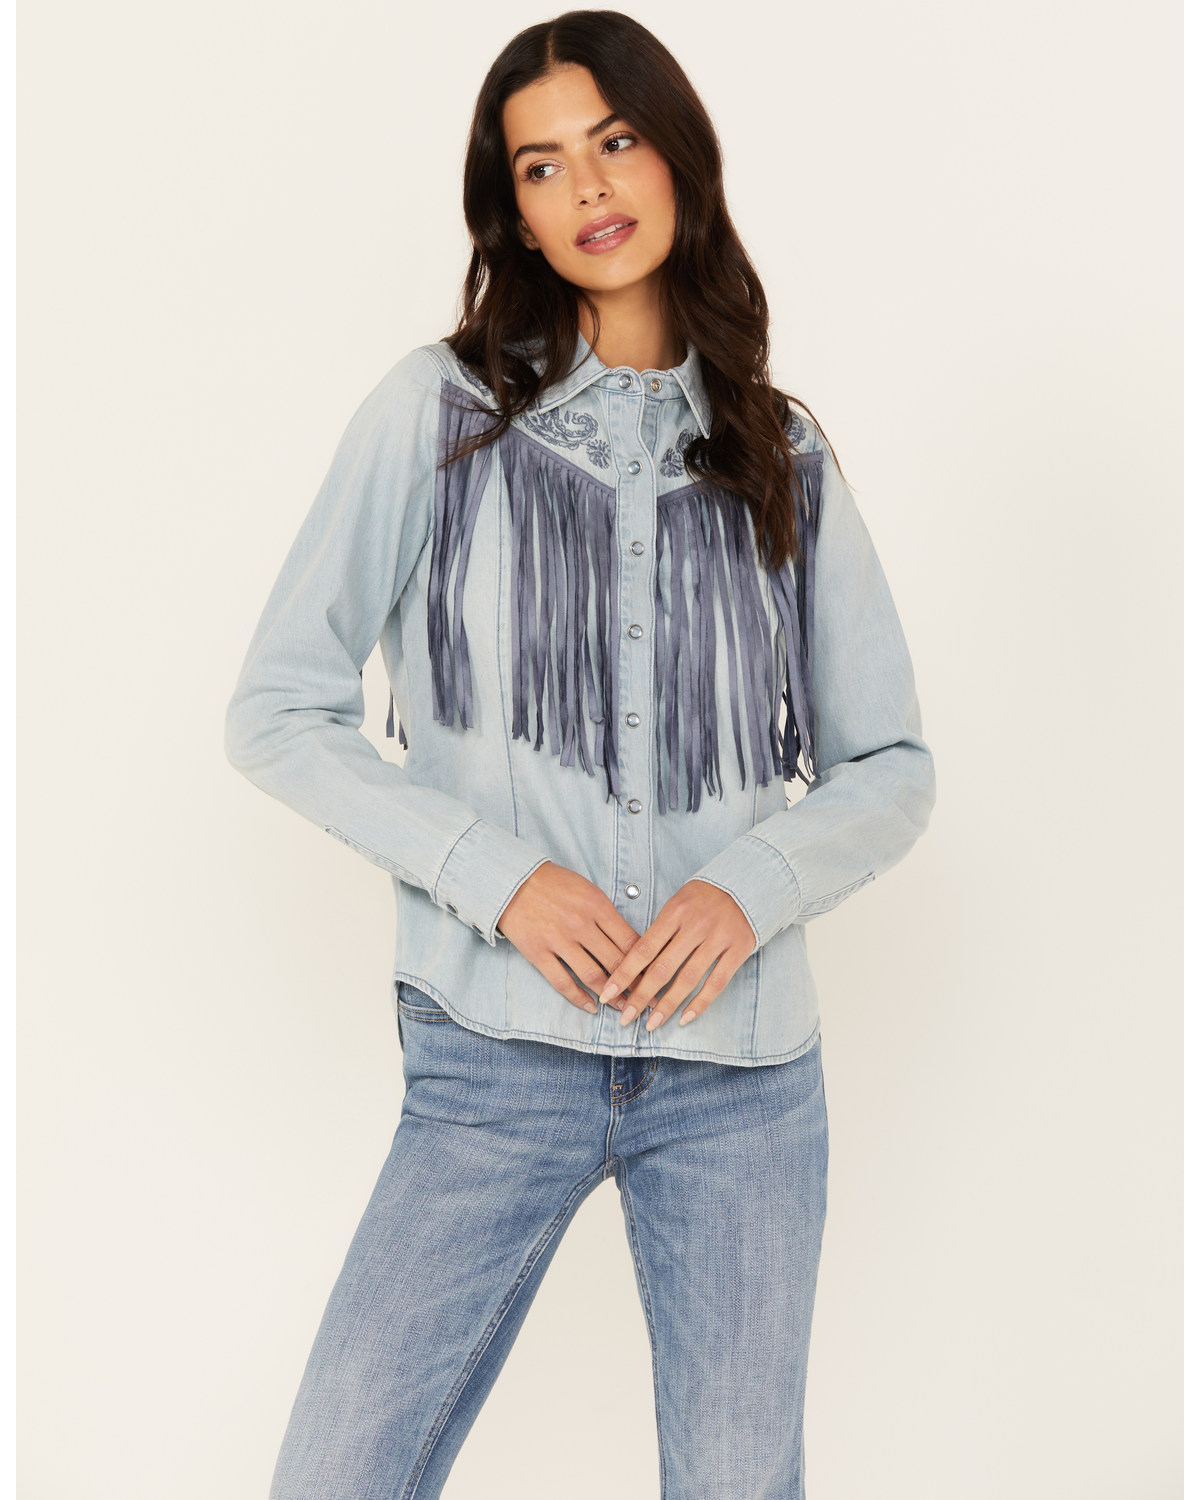 Idyllwind Women's Sutton Embroidered Chambray Fringe Top